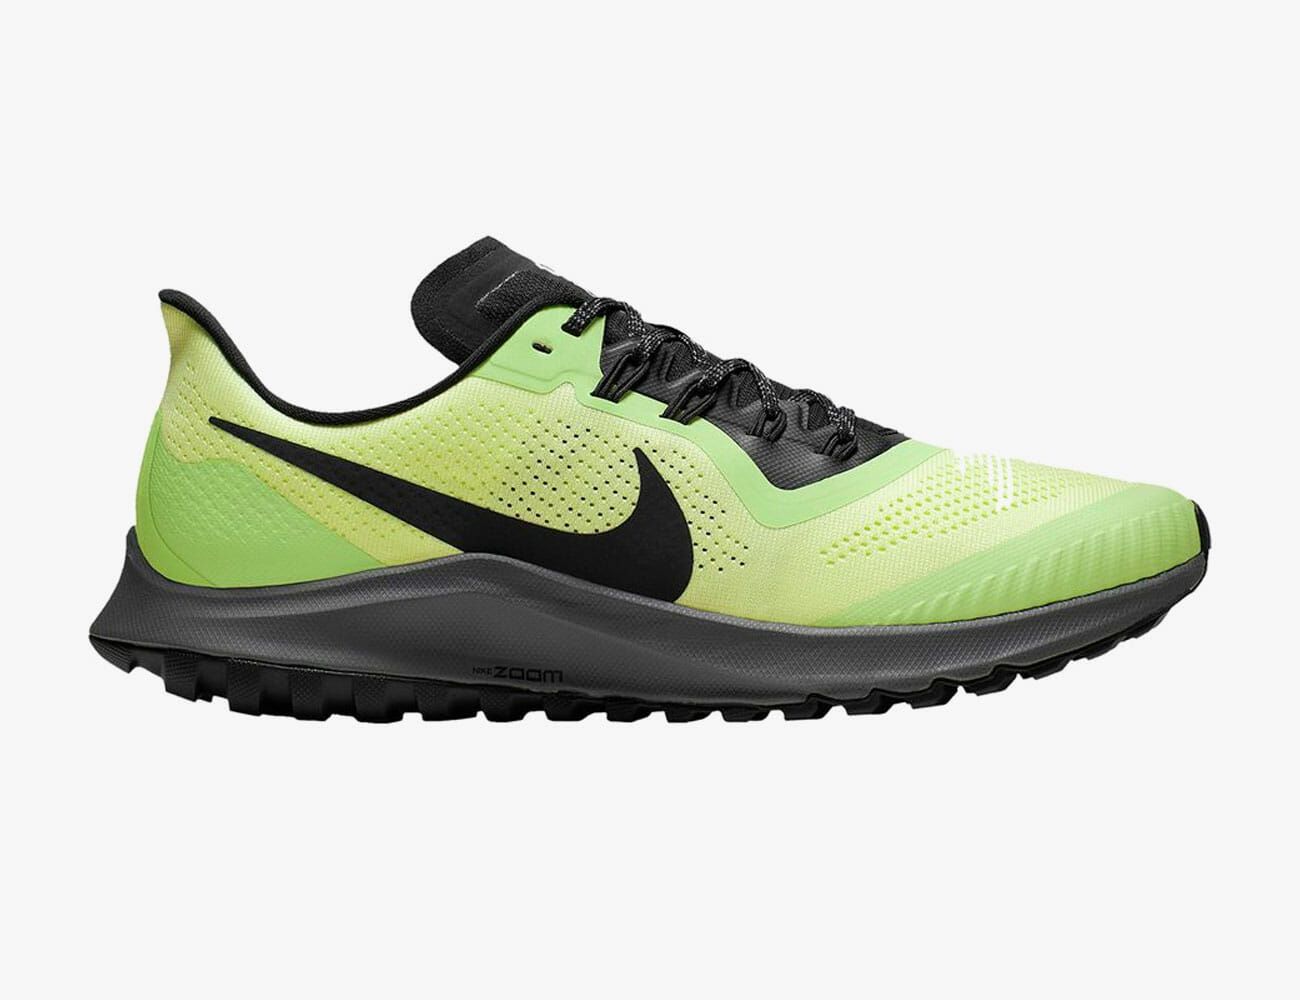 best nike shoes for walking on concrete all day